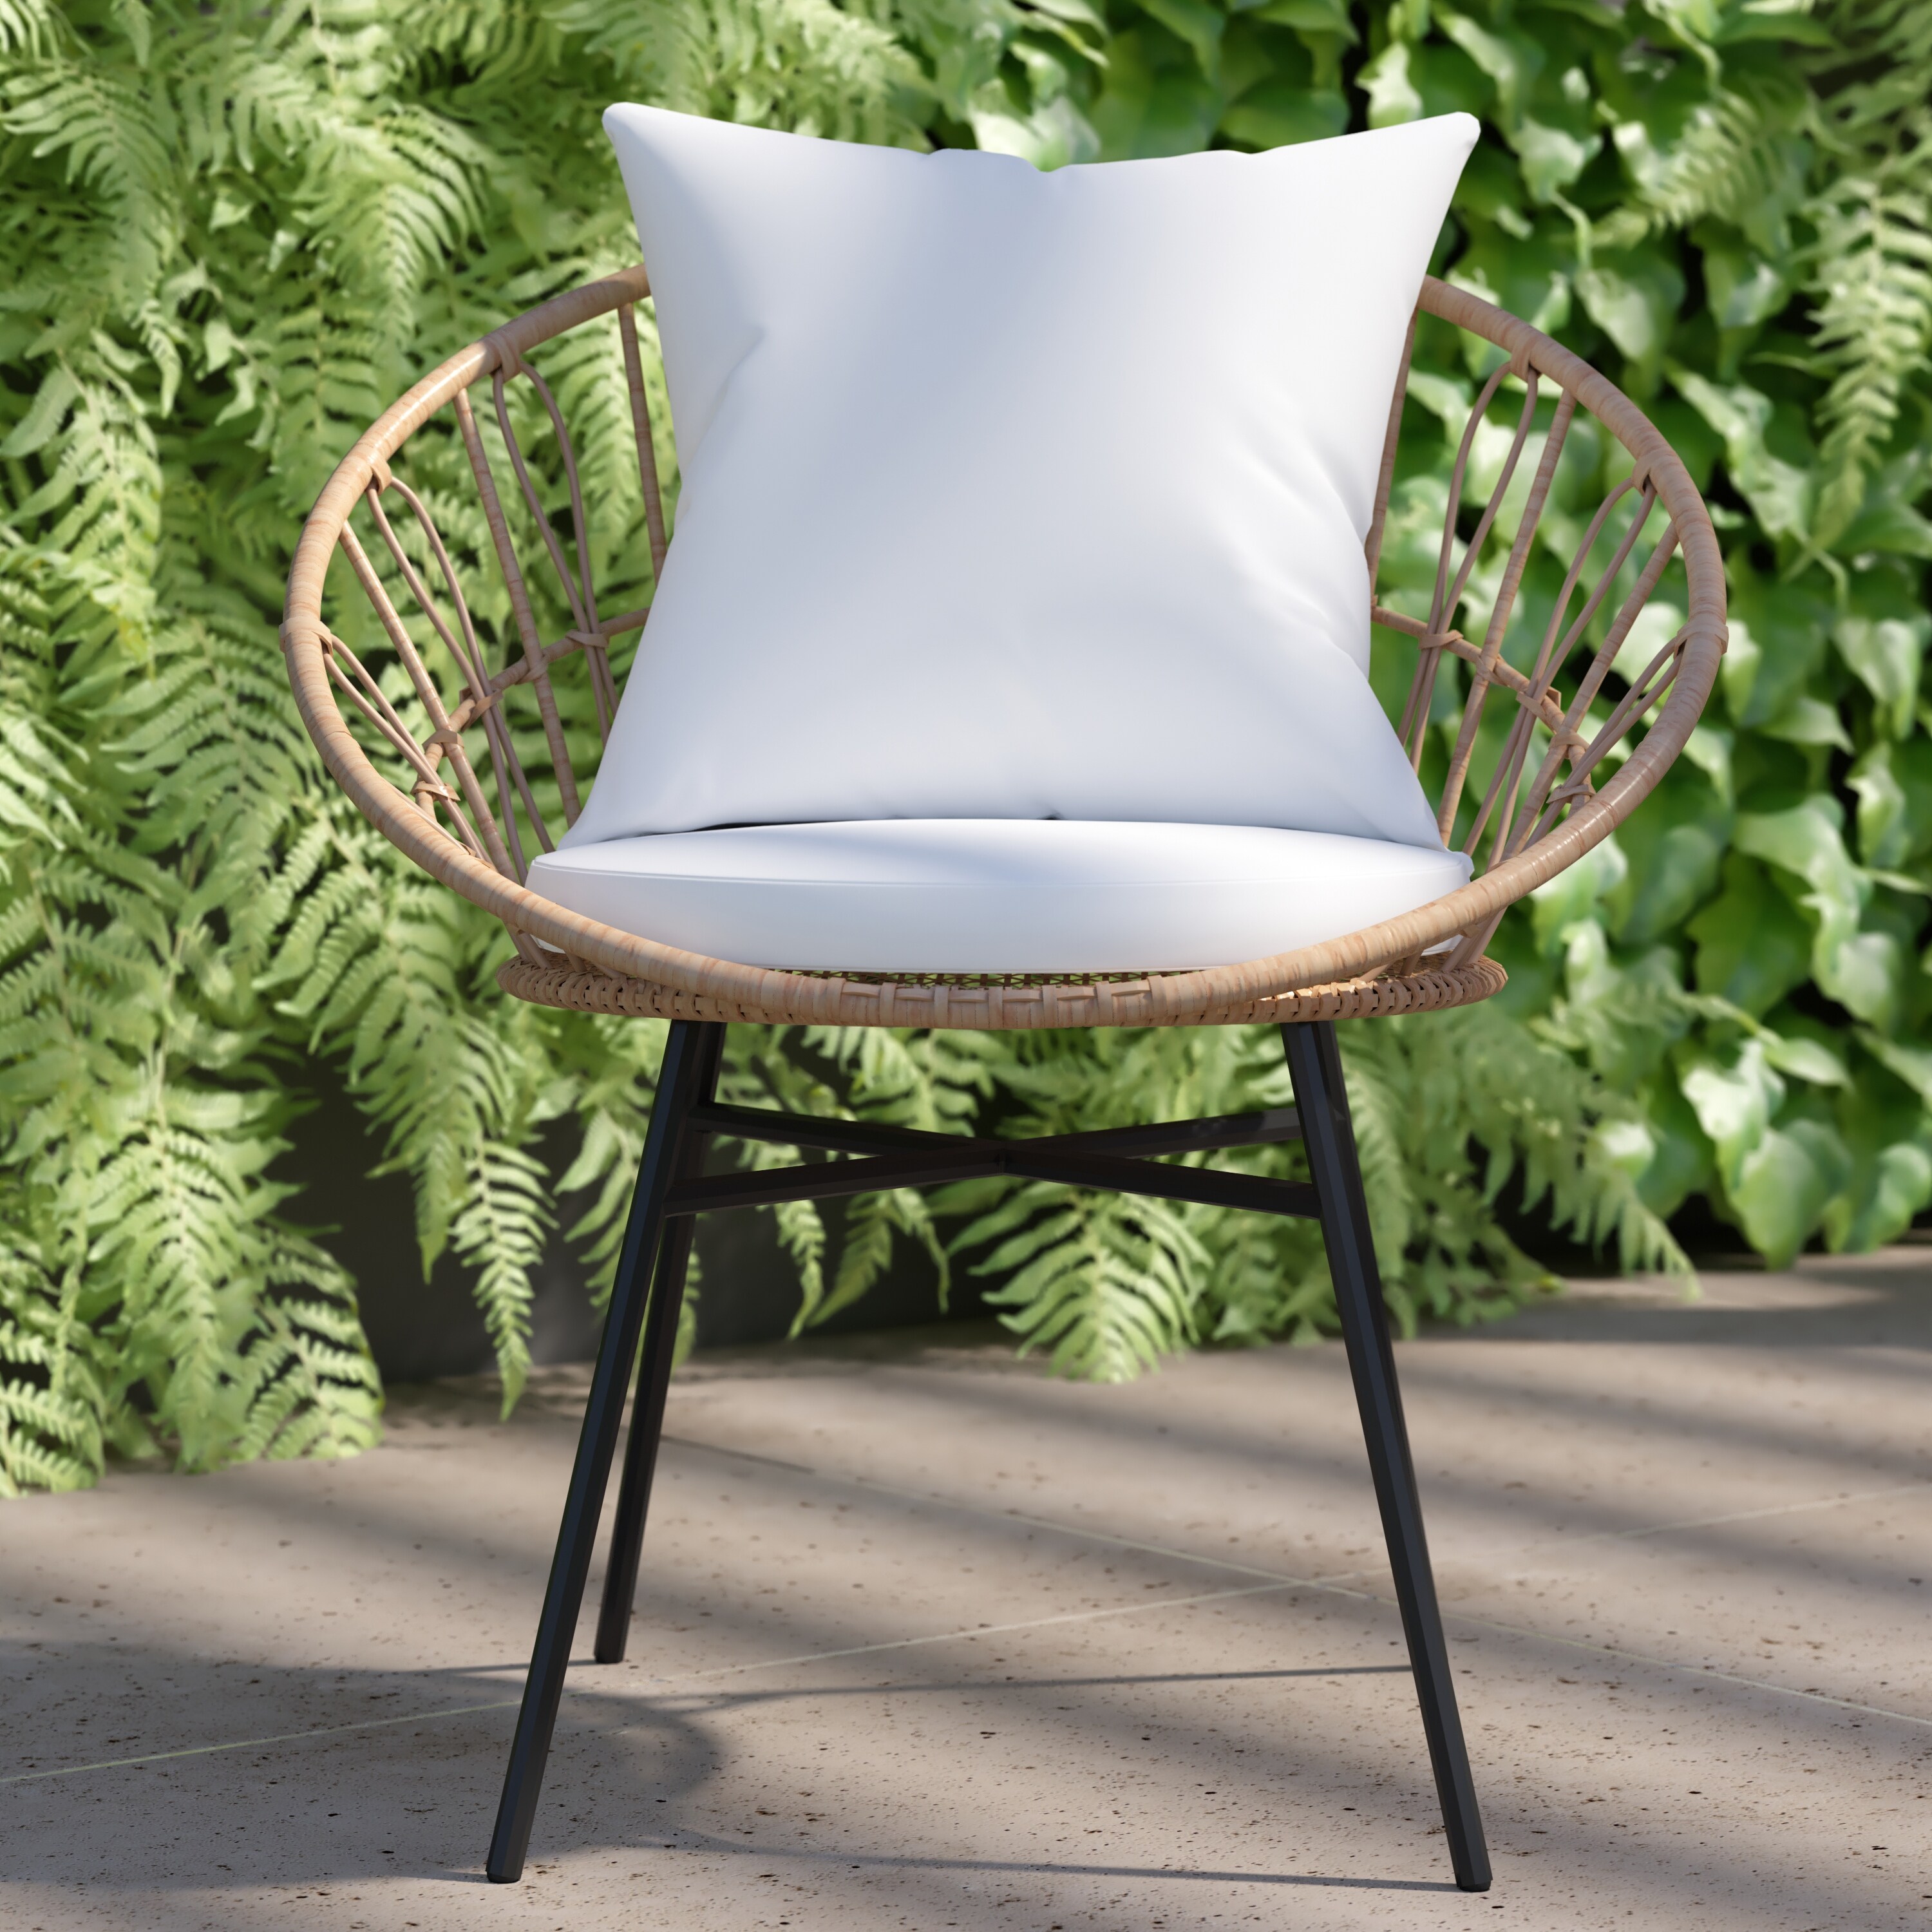 https://ak1.ostkcdn.com/images/products/is/images/direct/4dc584d881442819246a65e82147da8edba84275/Indoor-Outdoor-Boho-Rattan-Rope-Chairs-with-Back-%26-Seat-Cushions.jpg